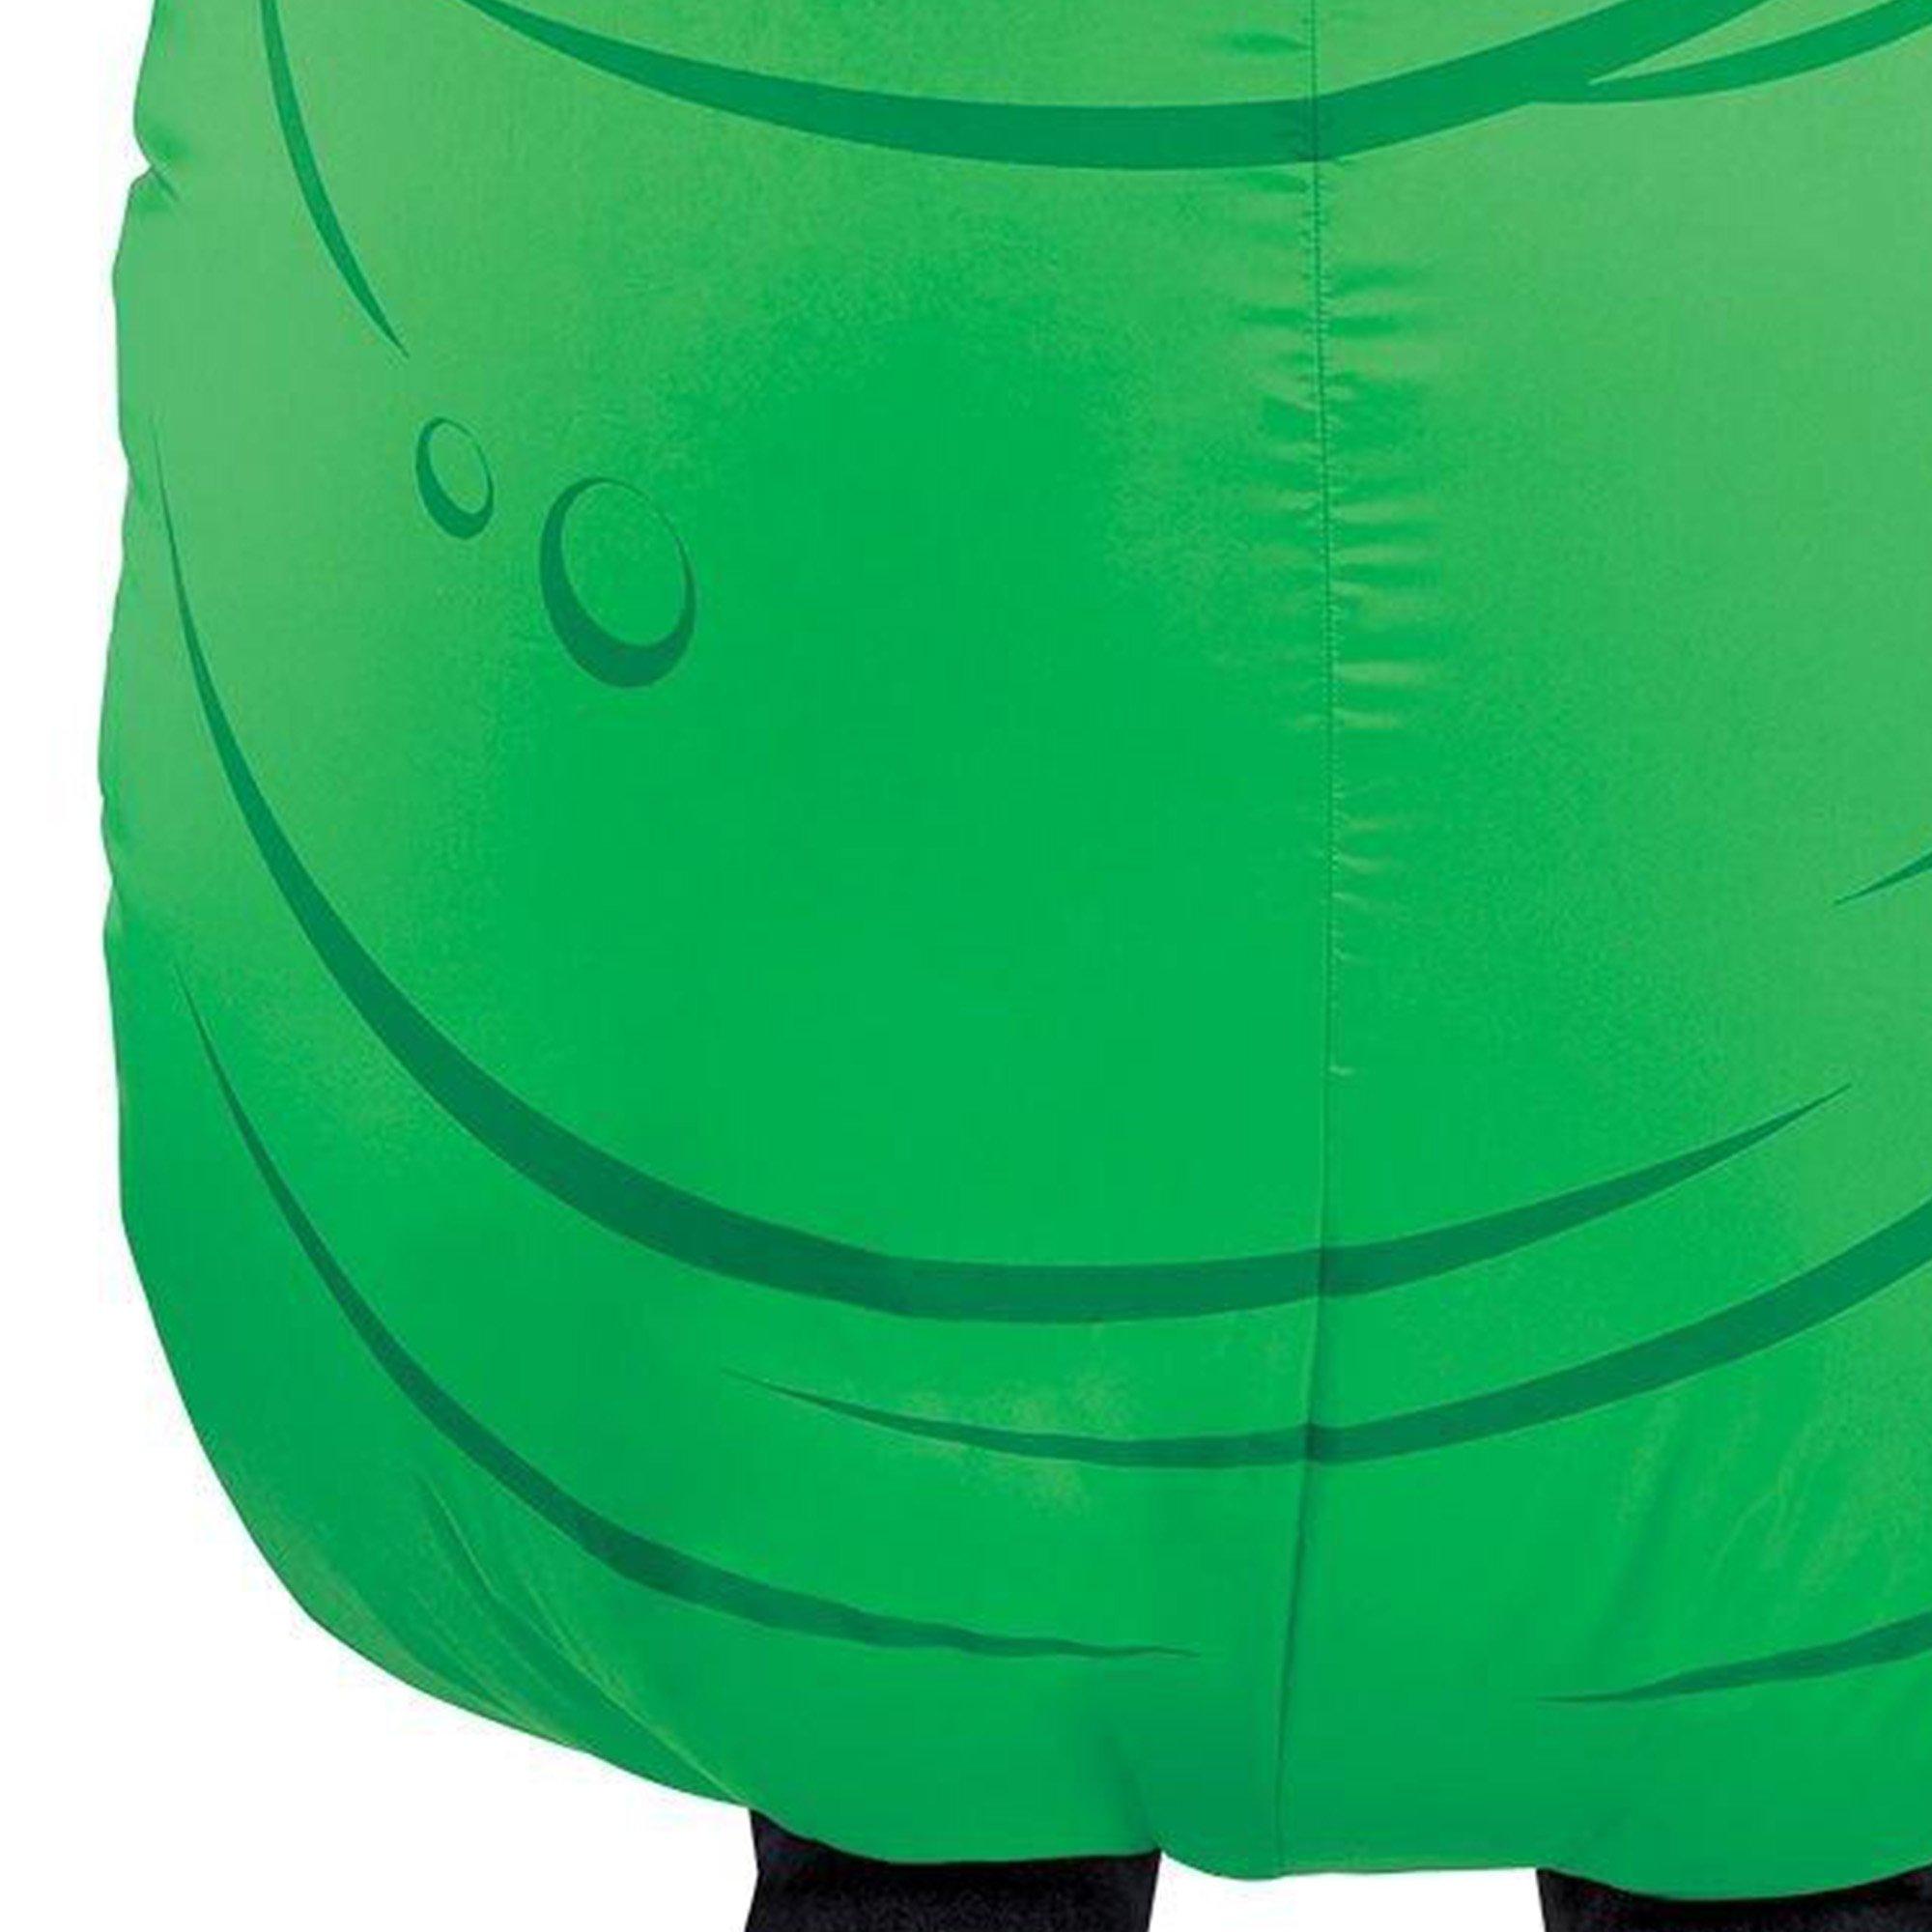 Adult Classic Inflatable Slimer Costume - Ghostbusters